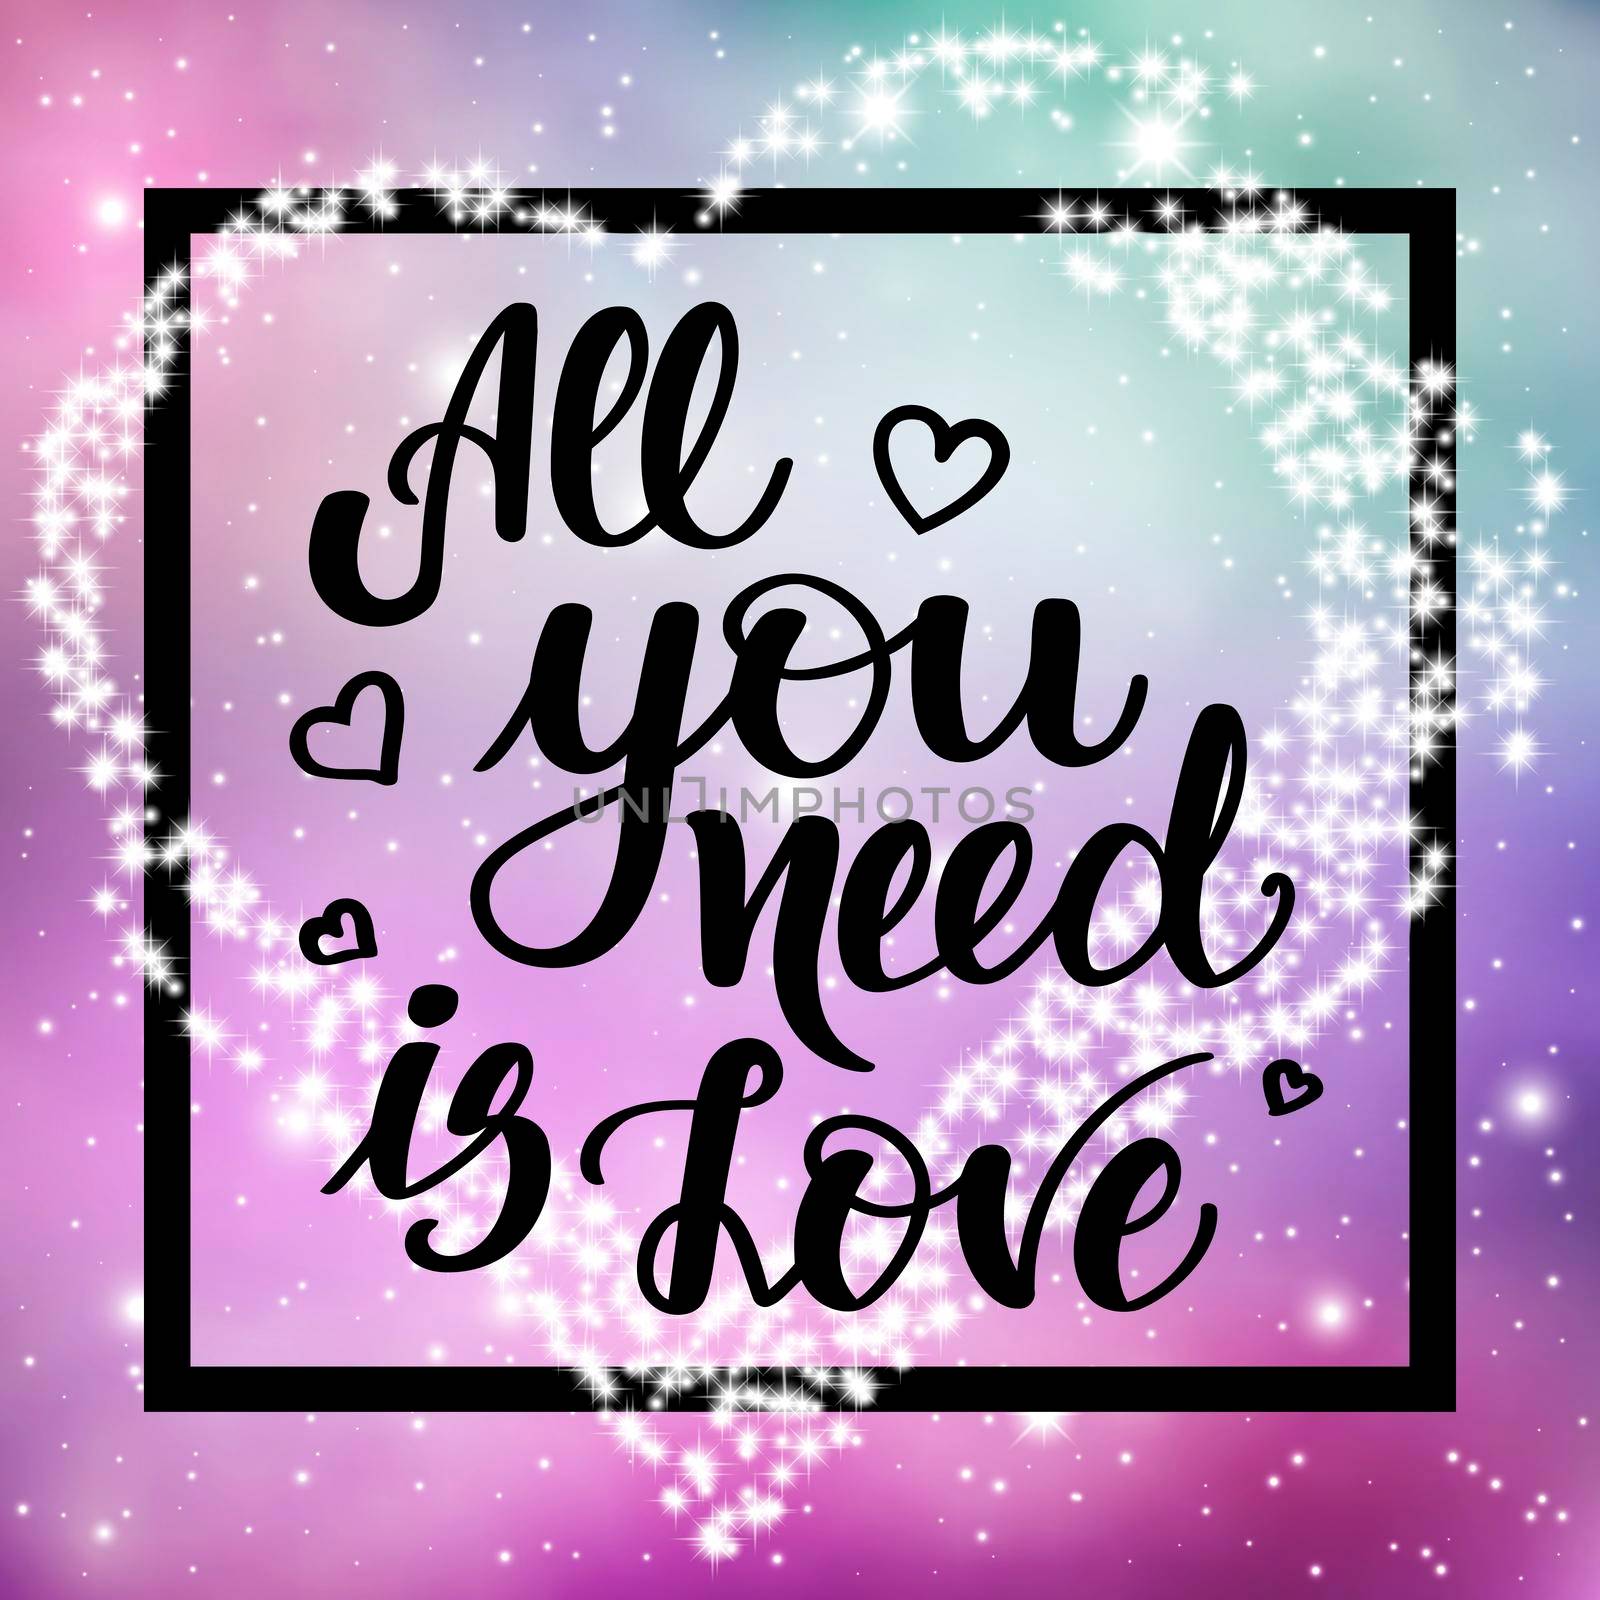 All you need is love. Motivational and inspirational handwritten lettering on space background. illustration for posters, cards and much more by Marin4ik